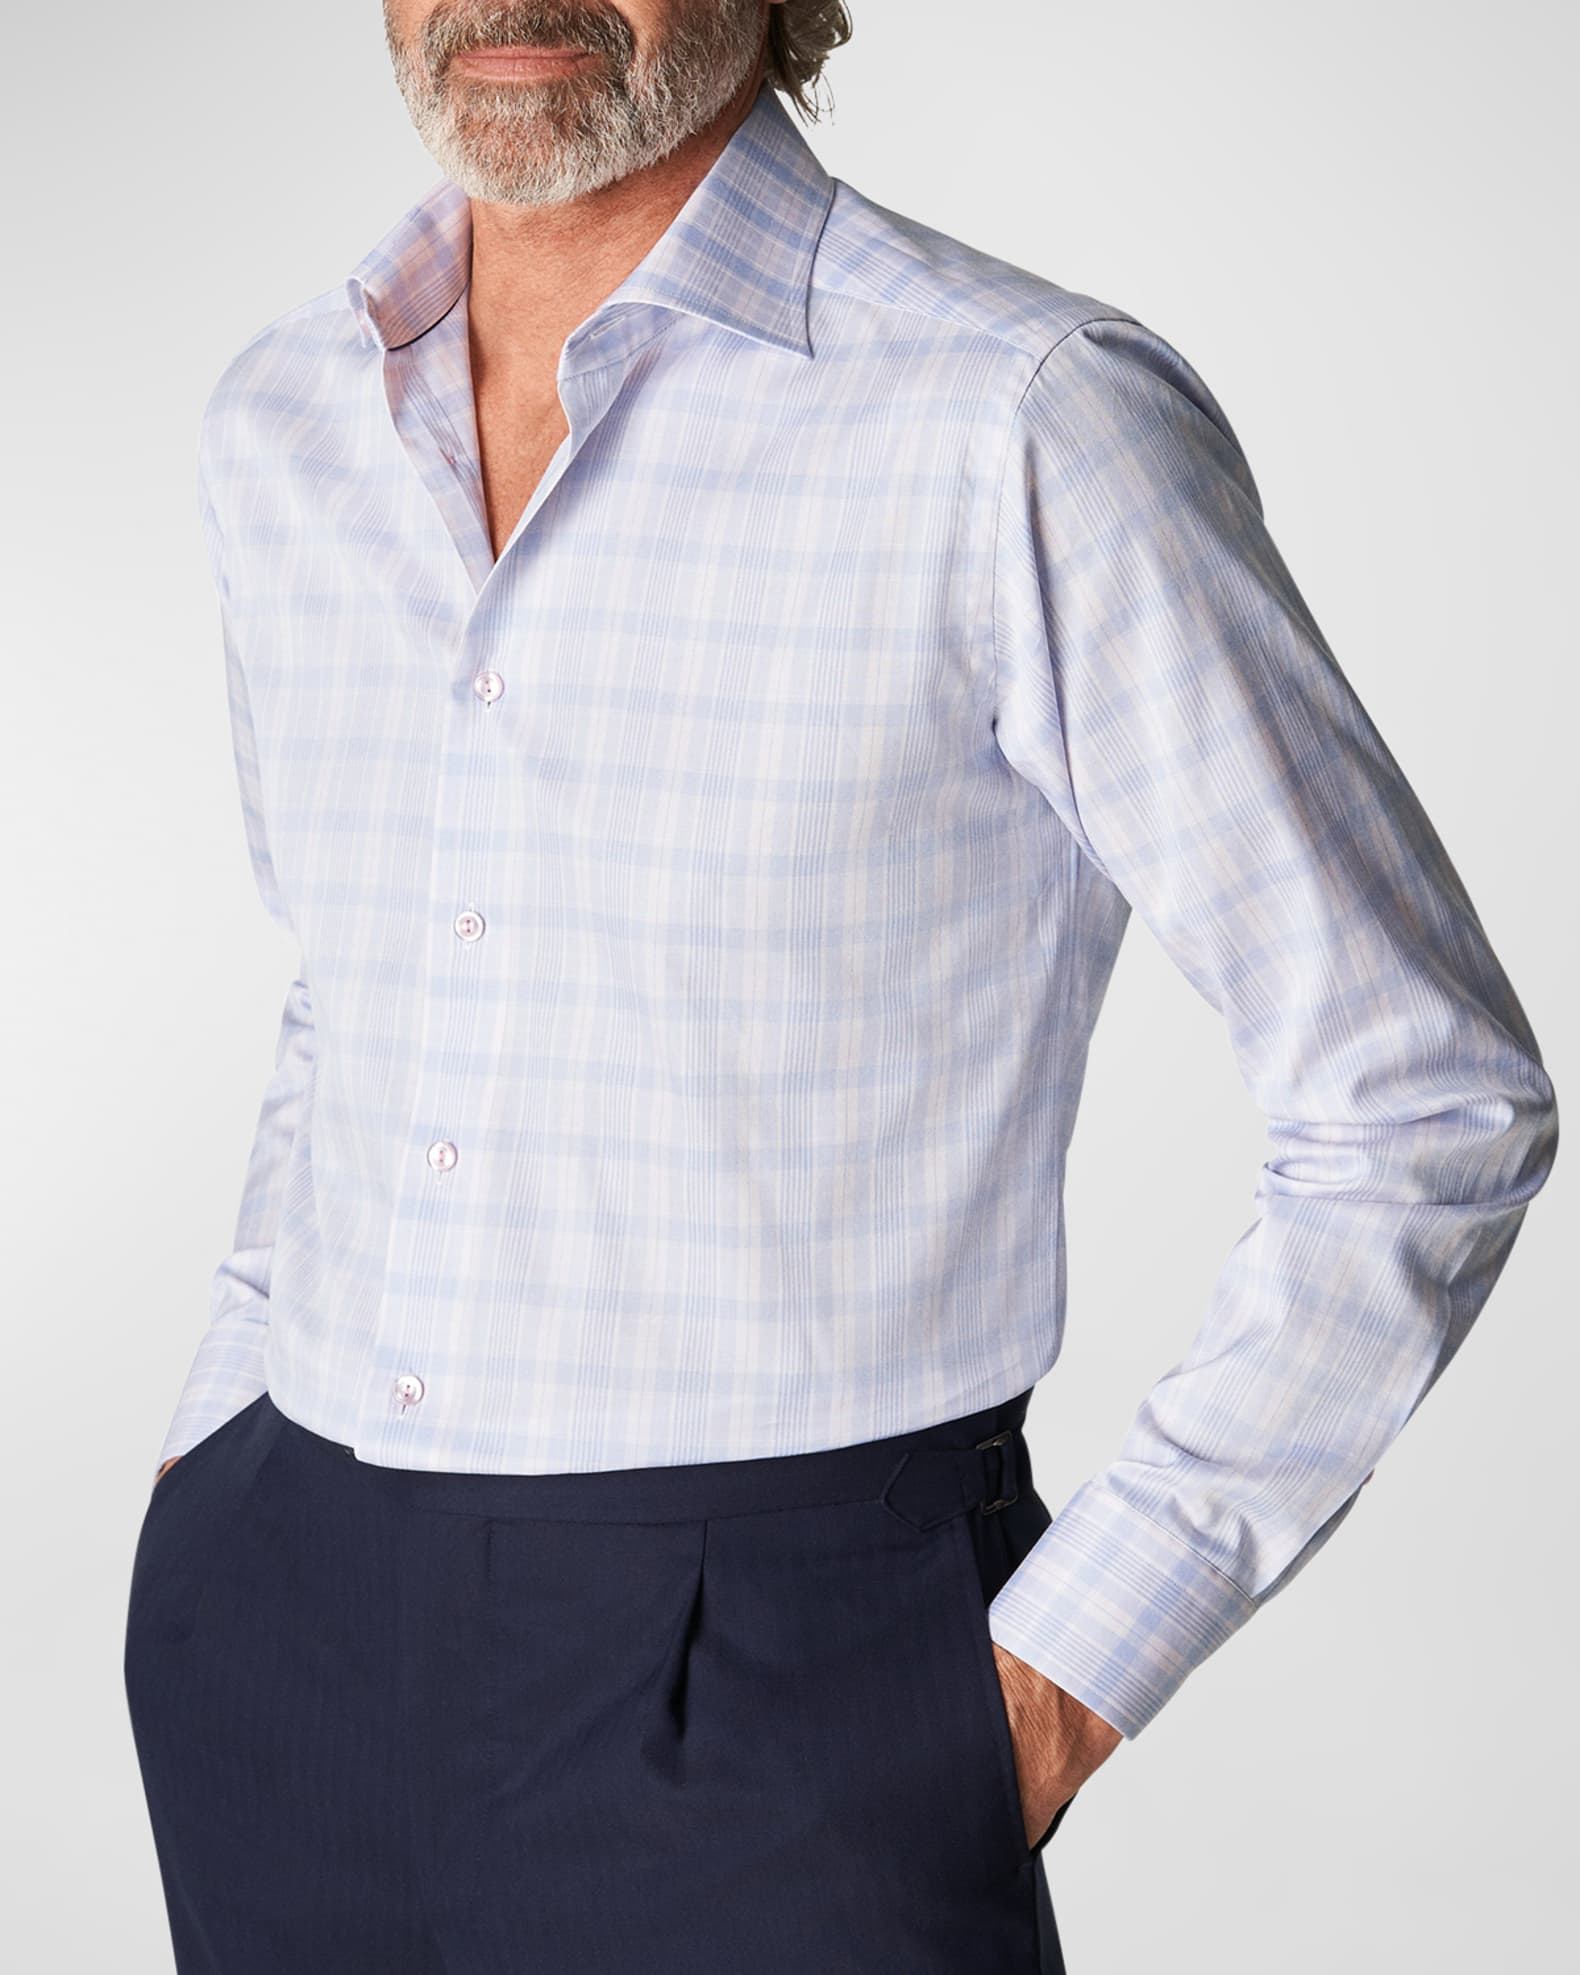 Pink Prince of Wales Check Twill Women's Shirt Available in Six Styles